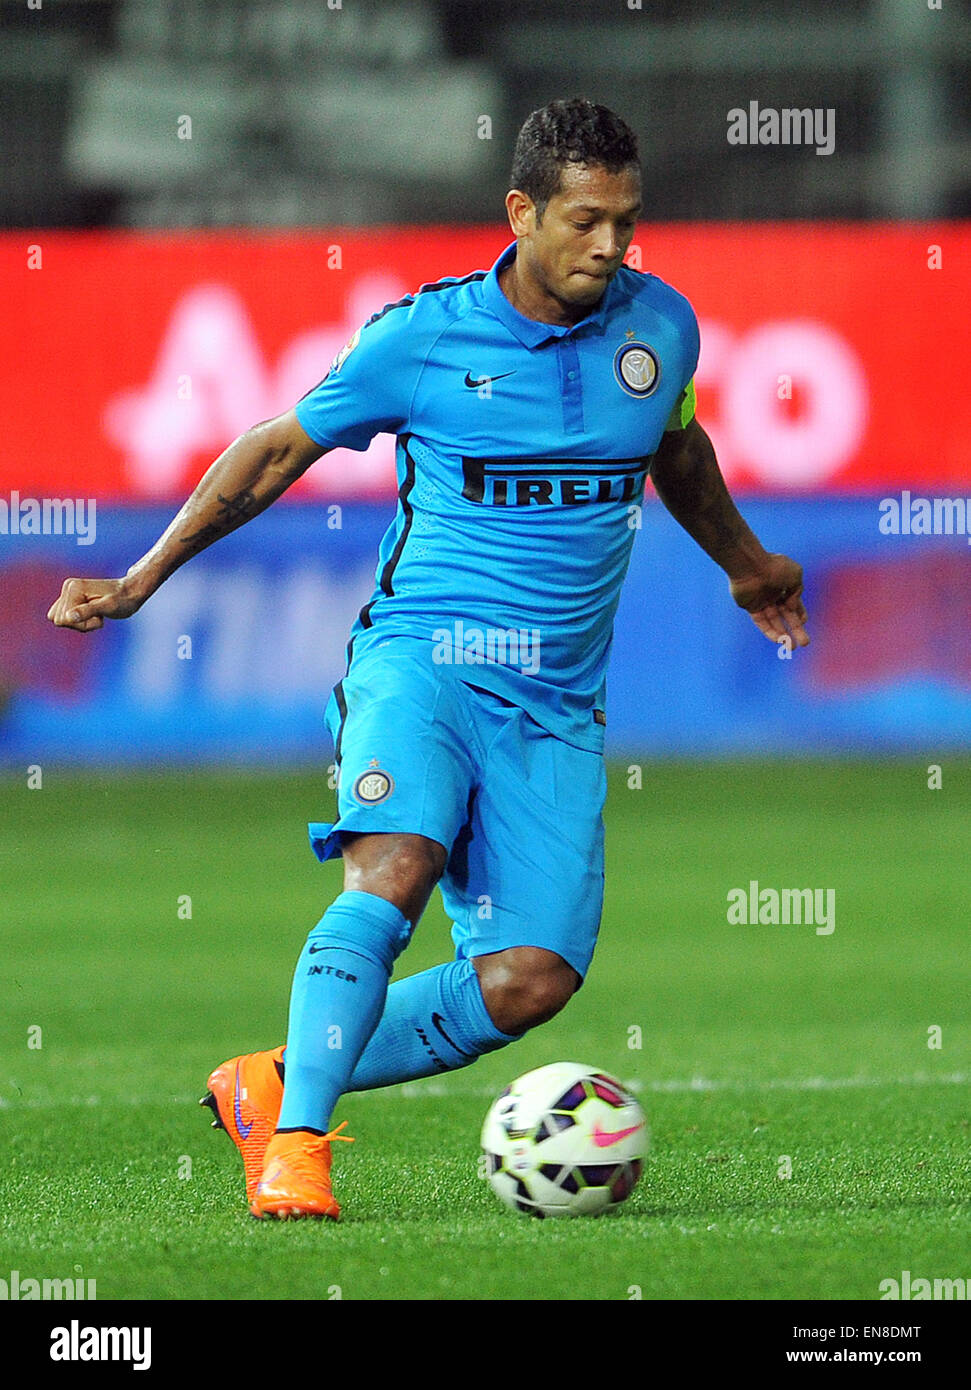 Udine, Italy. 28th April, 2015.  Inter Milan's midfielder Guarin controls the ball during the Italian Serie A football match between Udinese and Inter Milan on April 28, 2015, at Friuli Stadium. Credit:  Simone Ferraro / Alamy Live News Stock Photo